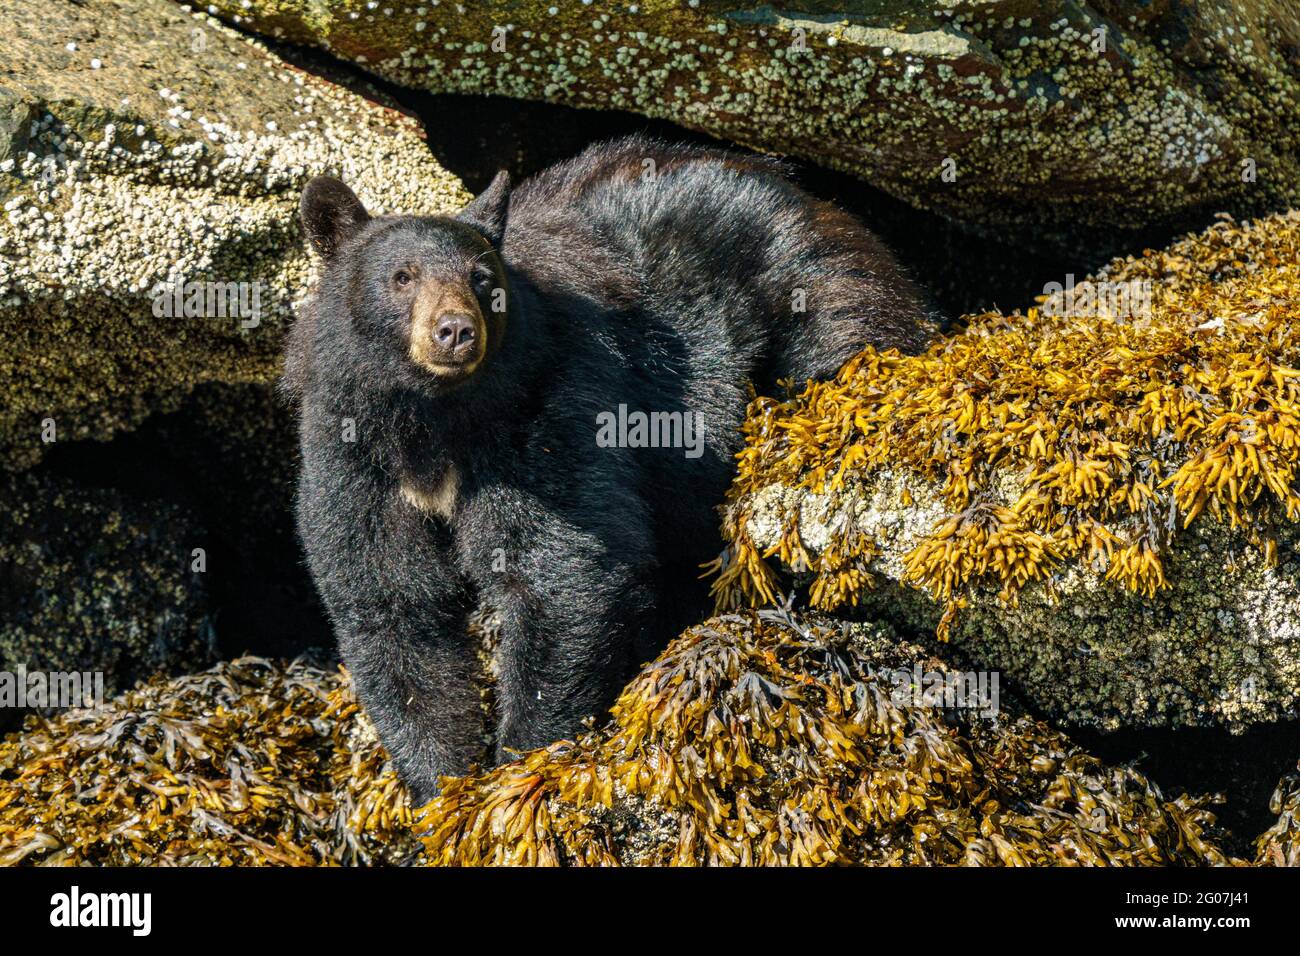 Black bear sitting at low tide on a small island in the Broughton Archipelago, First Nations Territory, British Columbia, Canada Stock Photo